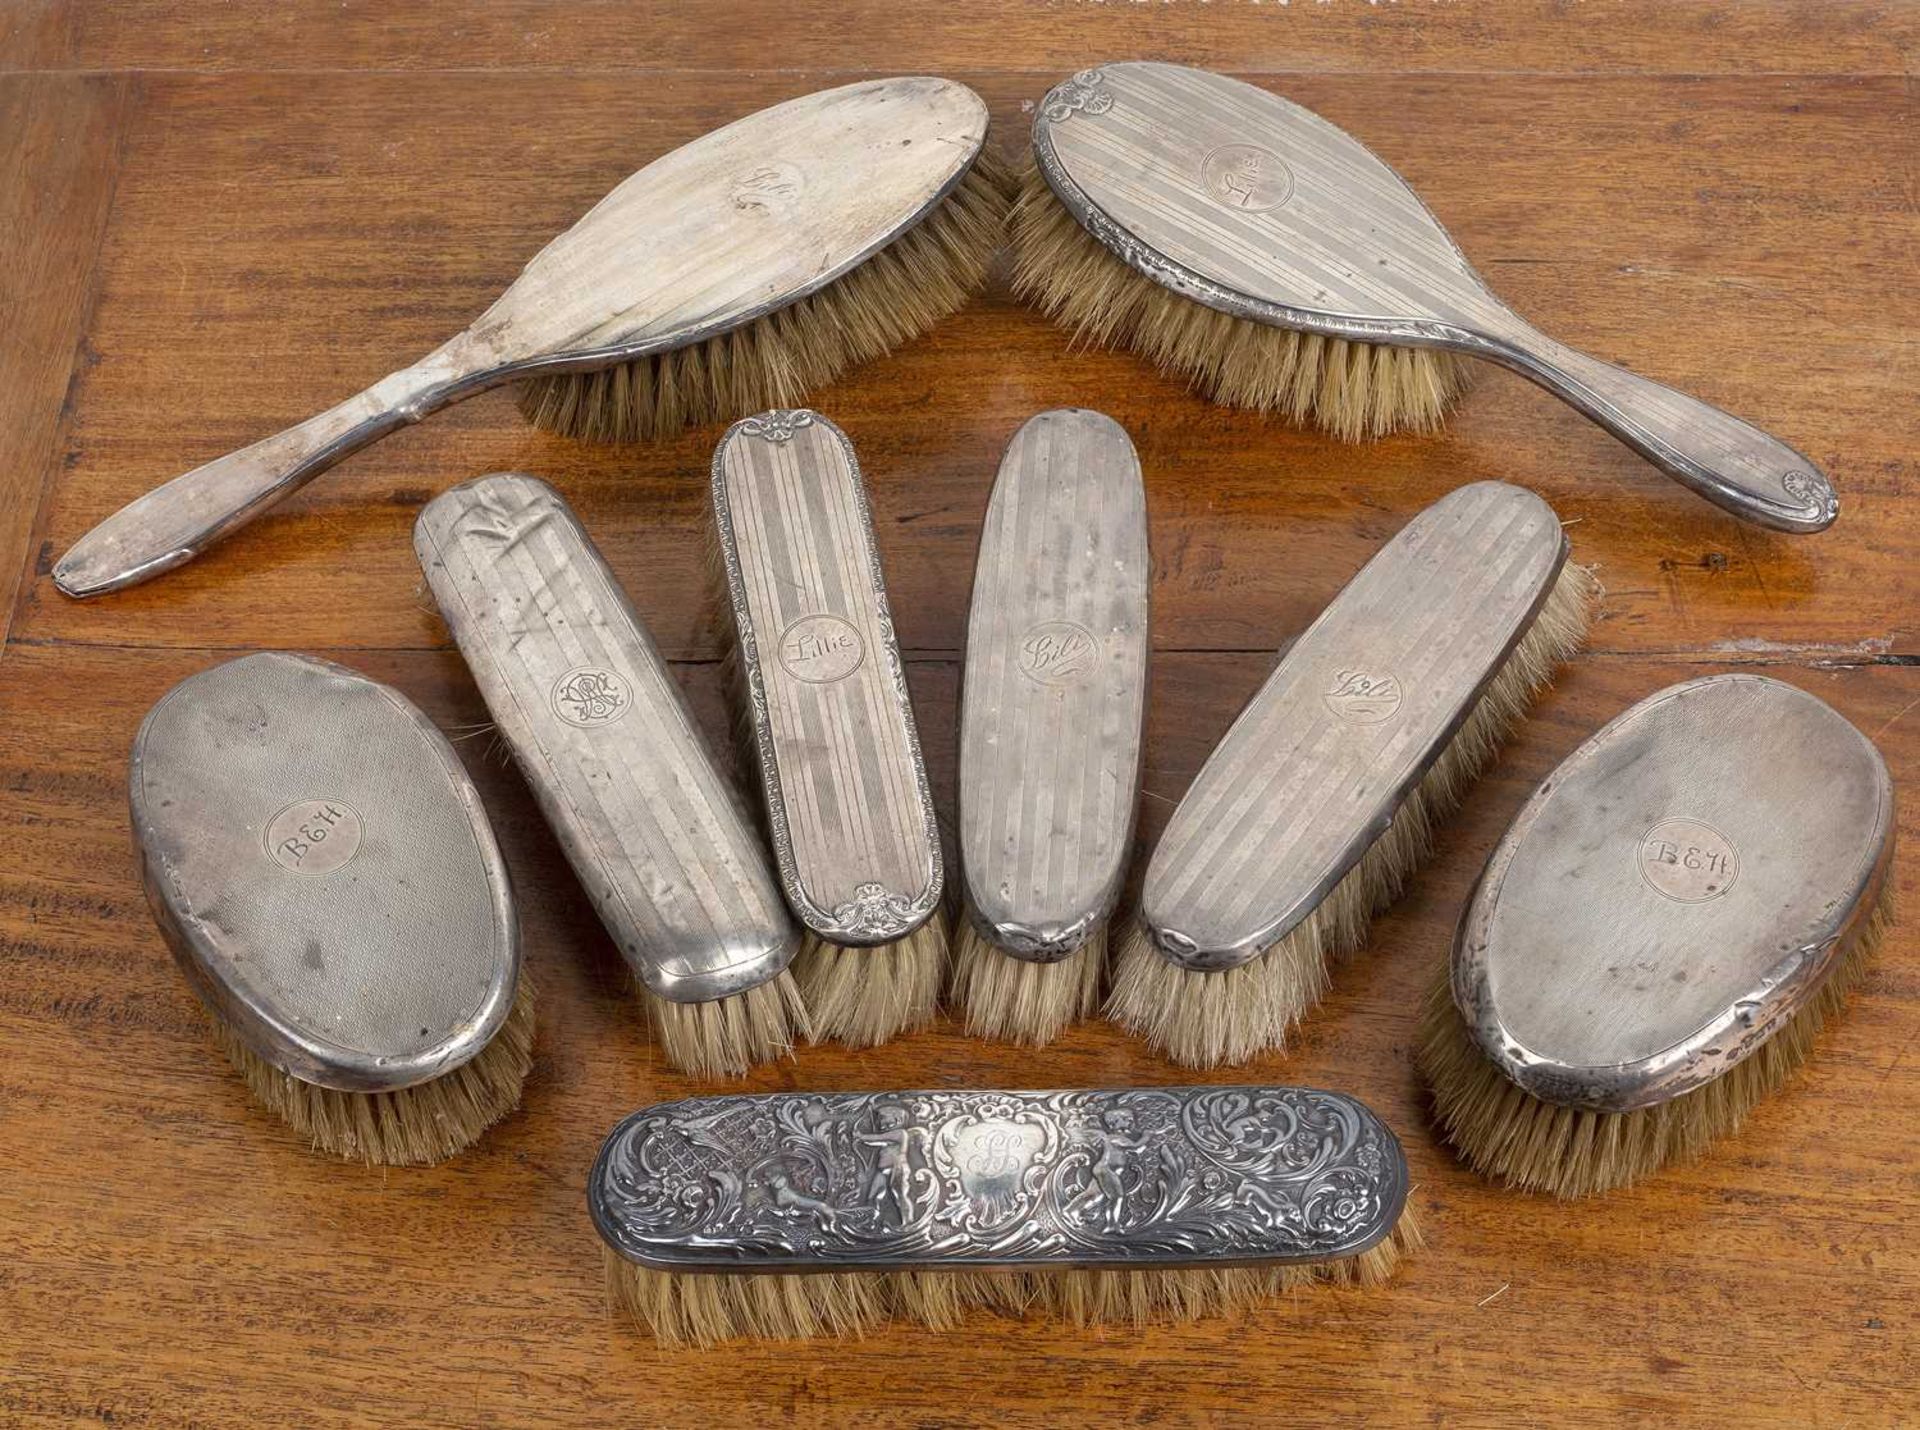 Nine silver-backed hairbrushes Worn and with bumps